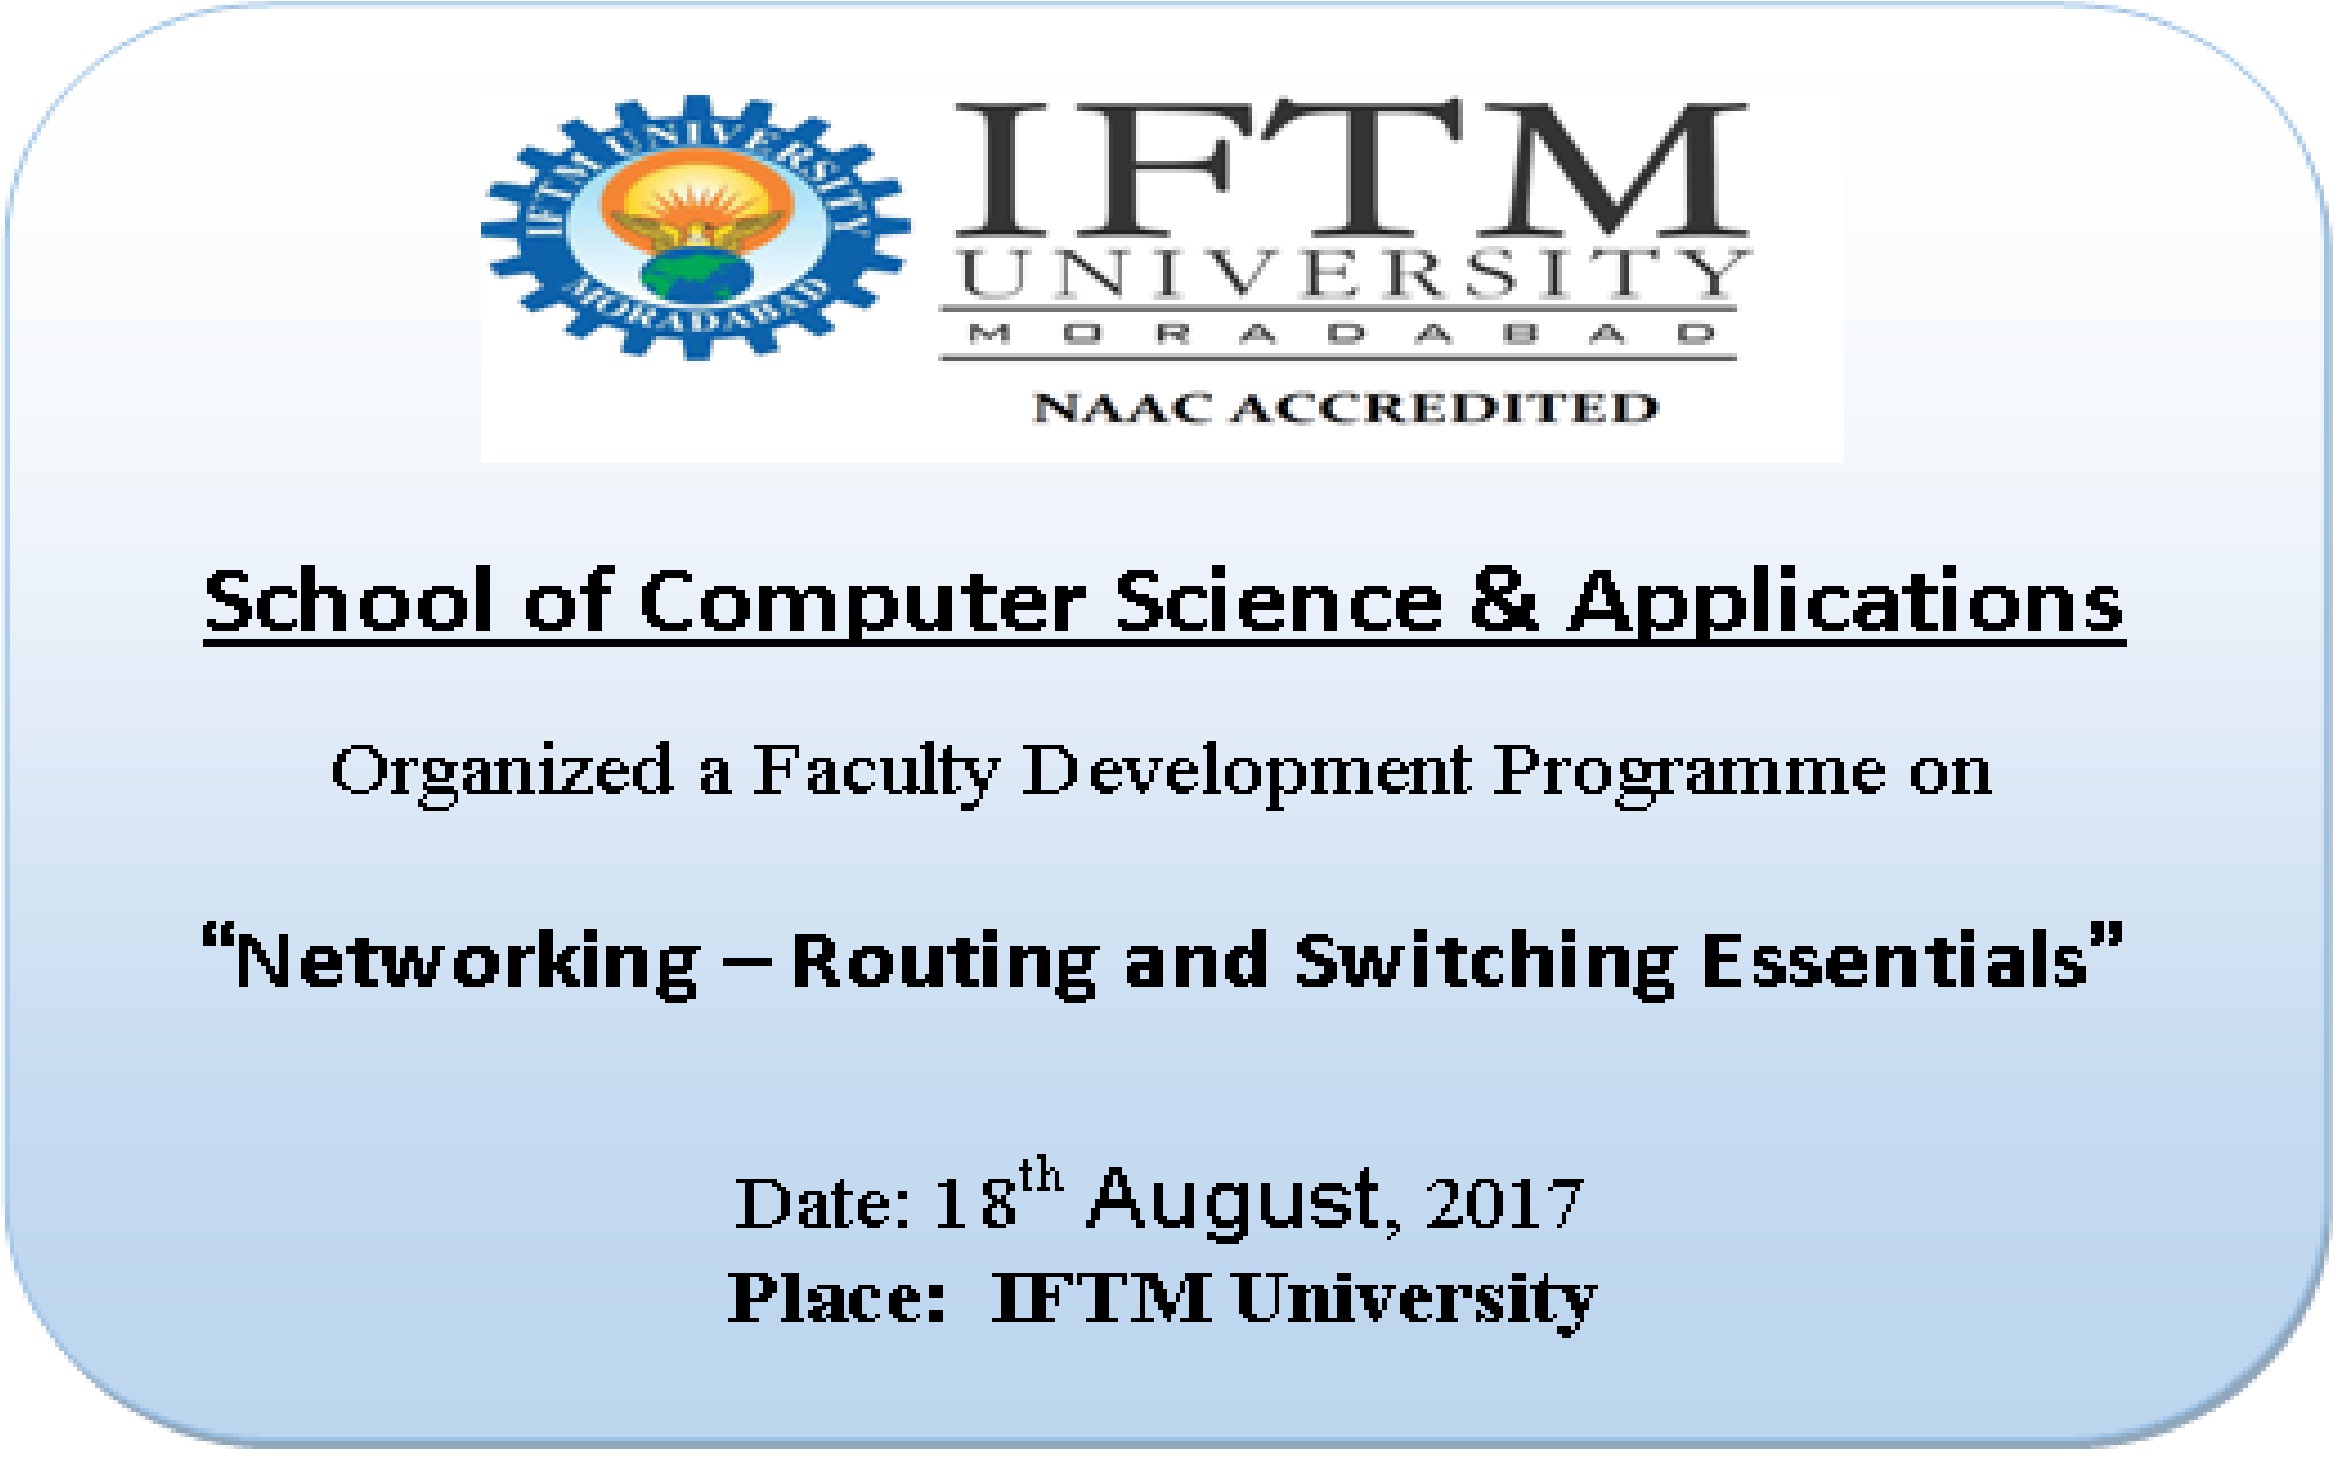 Faculty Development Programme on Networking Routing and Switching Essentials